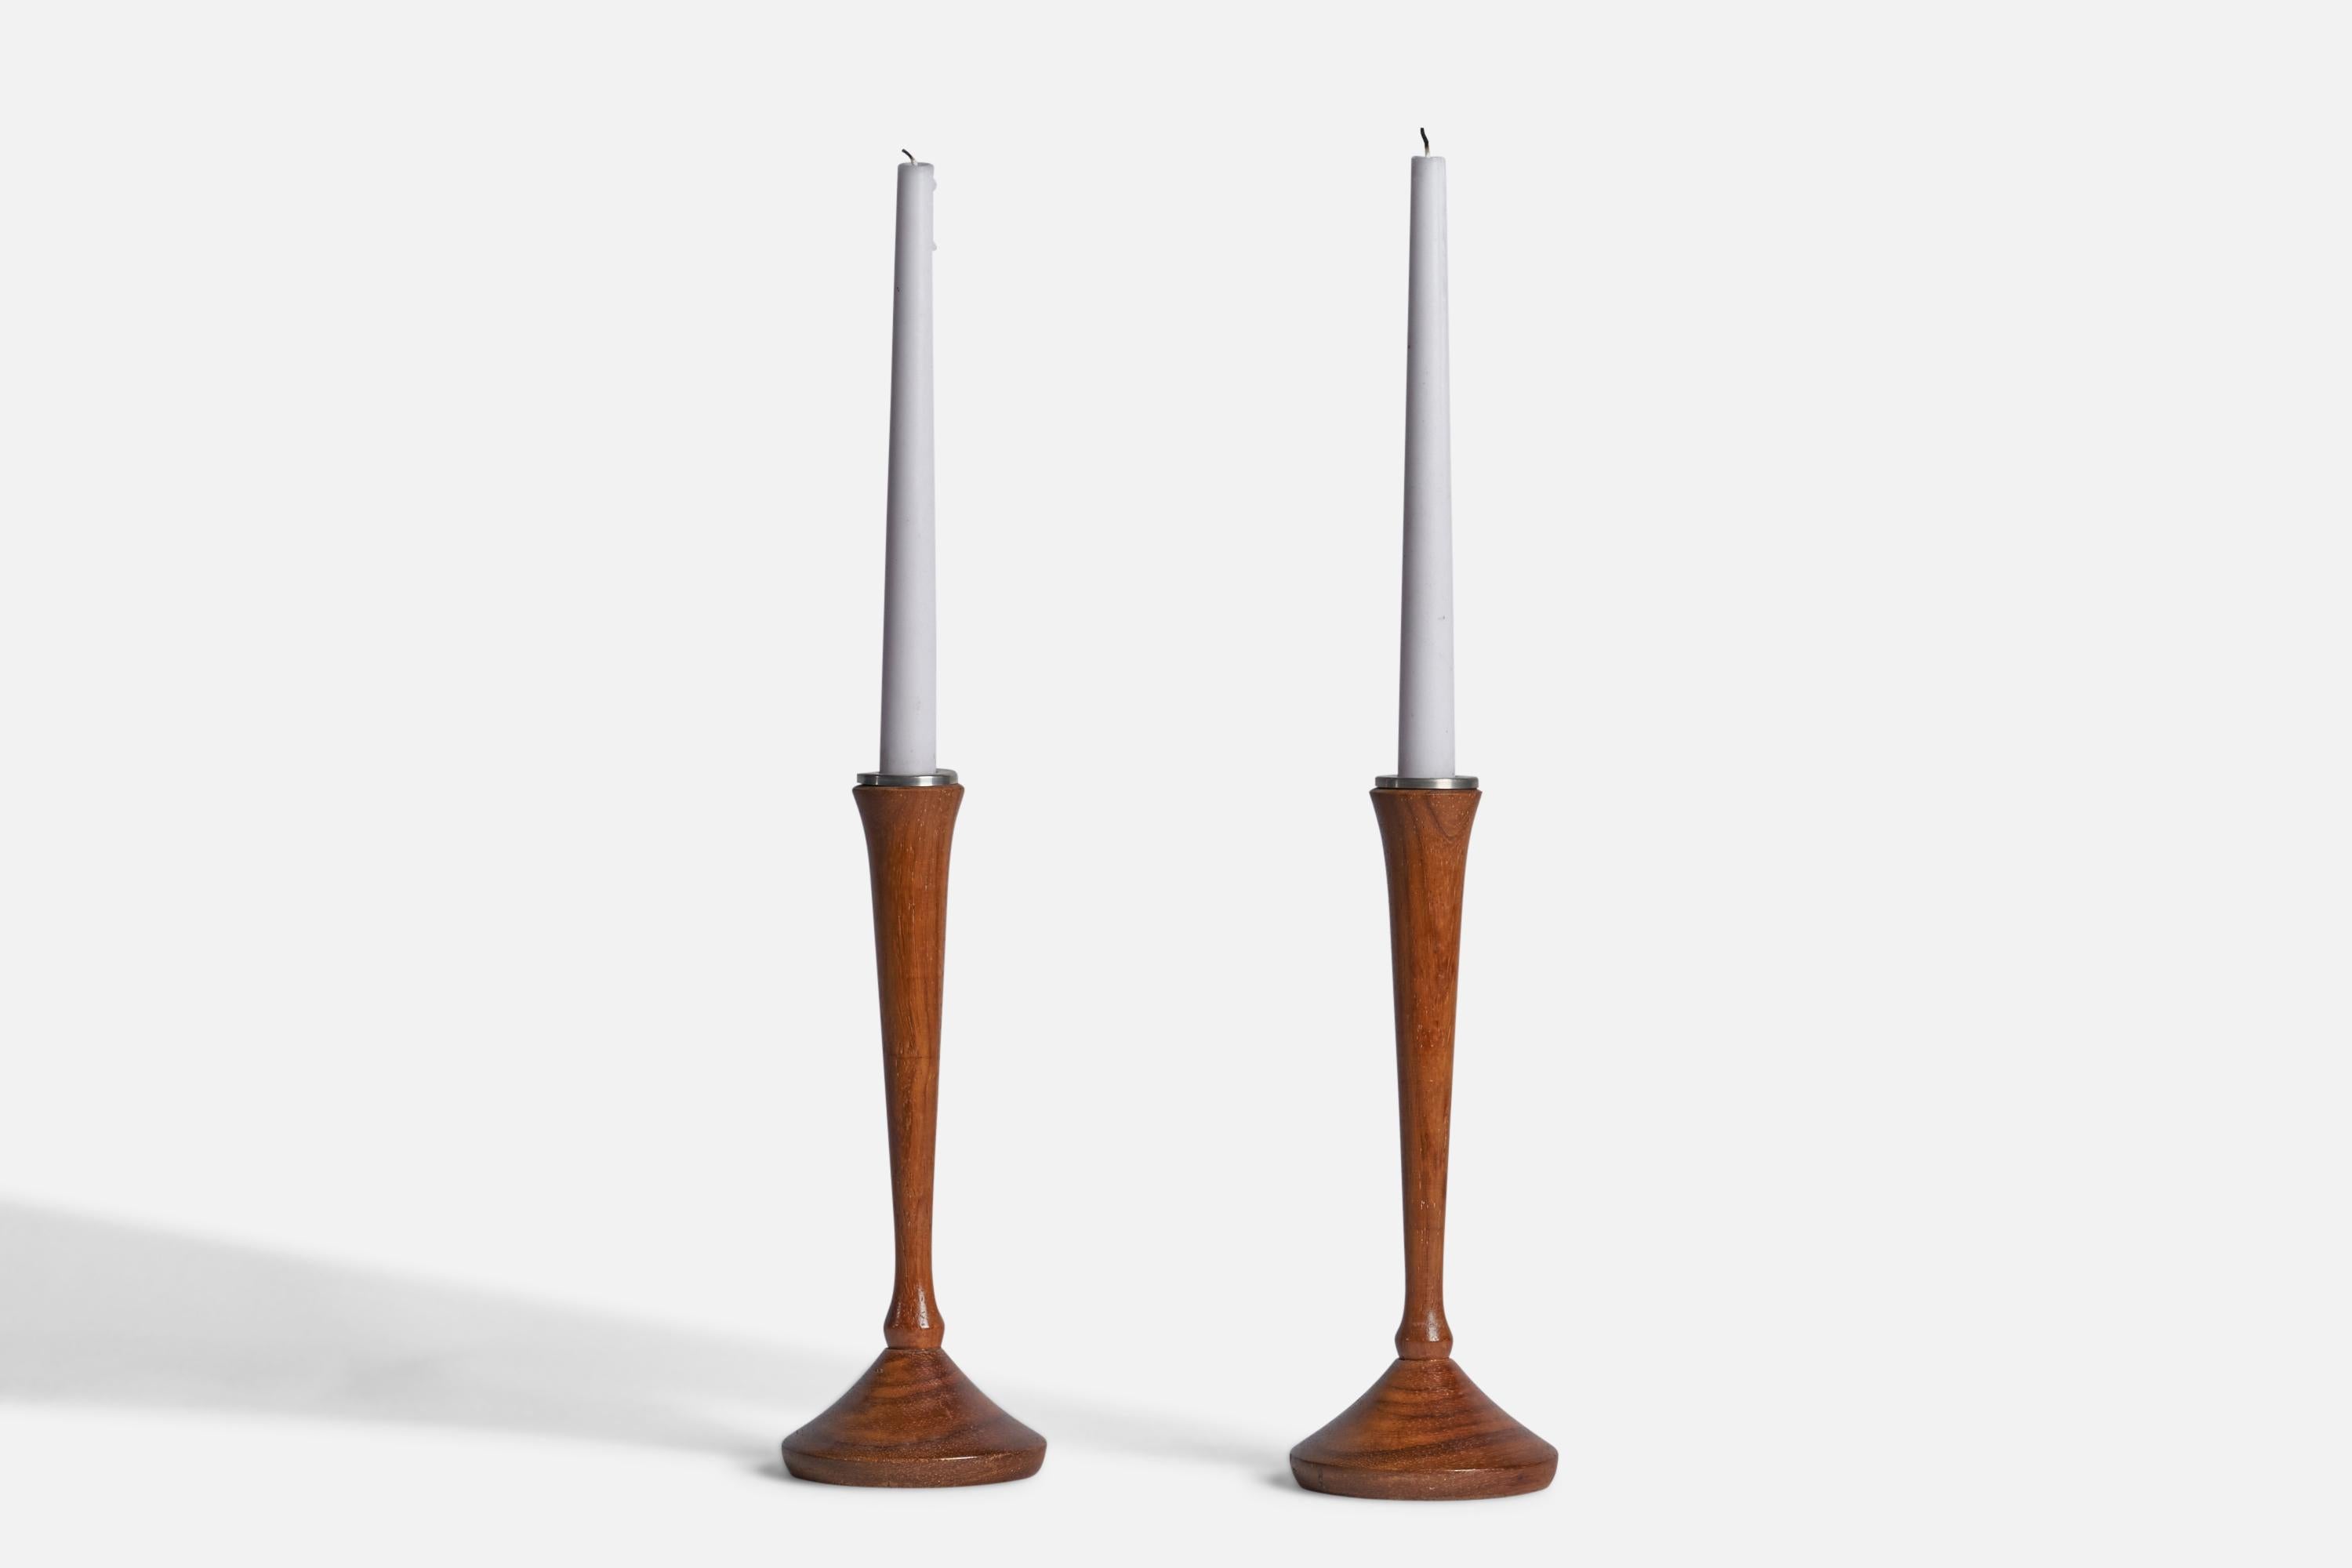 A pair of walnut and metal candlesticks designed and produced in Denmark, 1950s.

Holds 0.75” candles